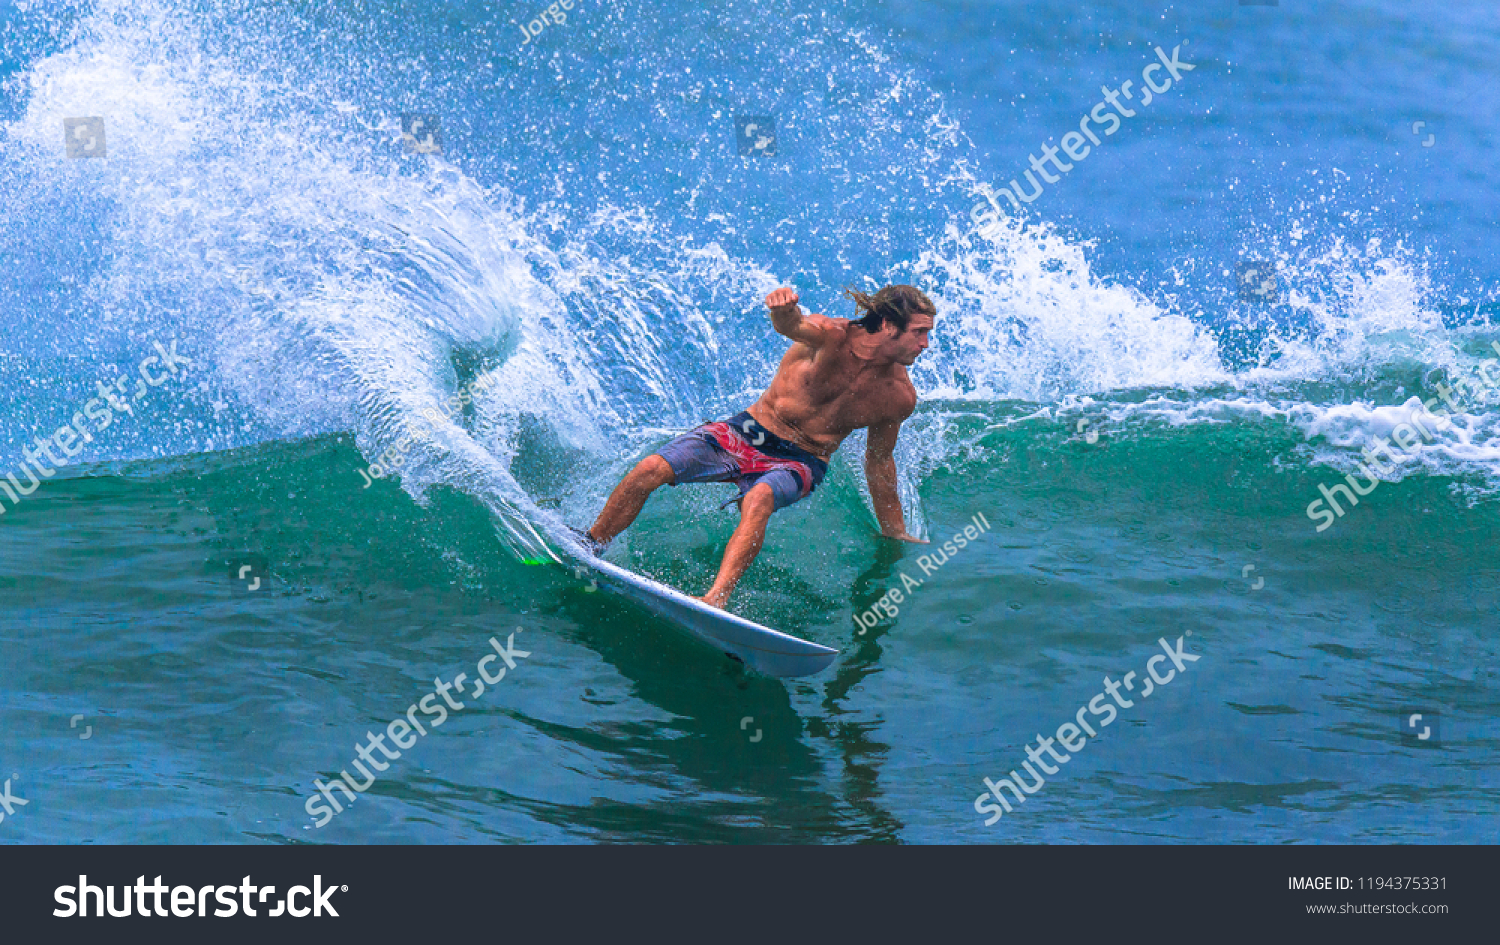 Riding the waves. Costa Rica, surfing paradise #1194375331